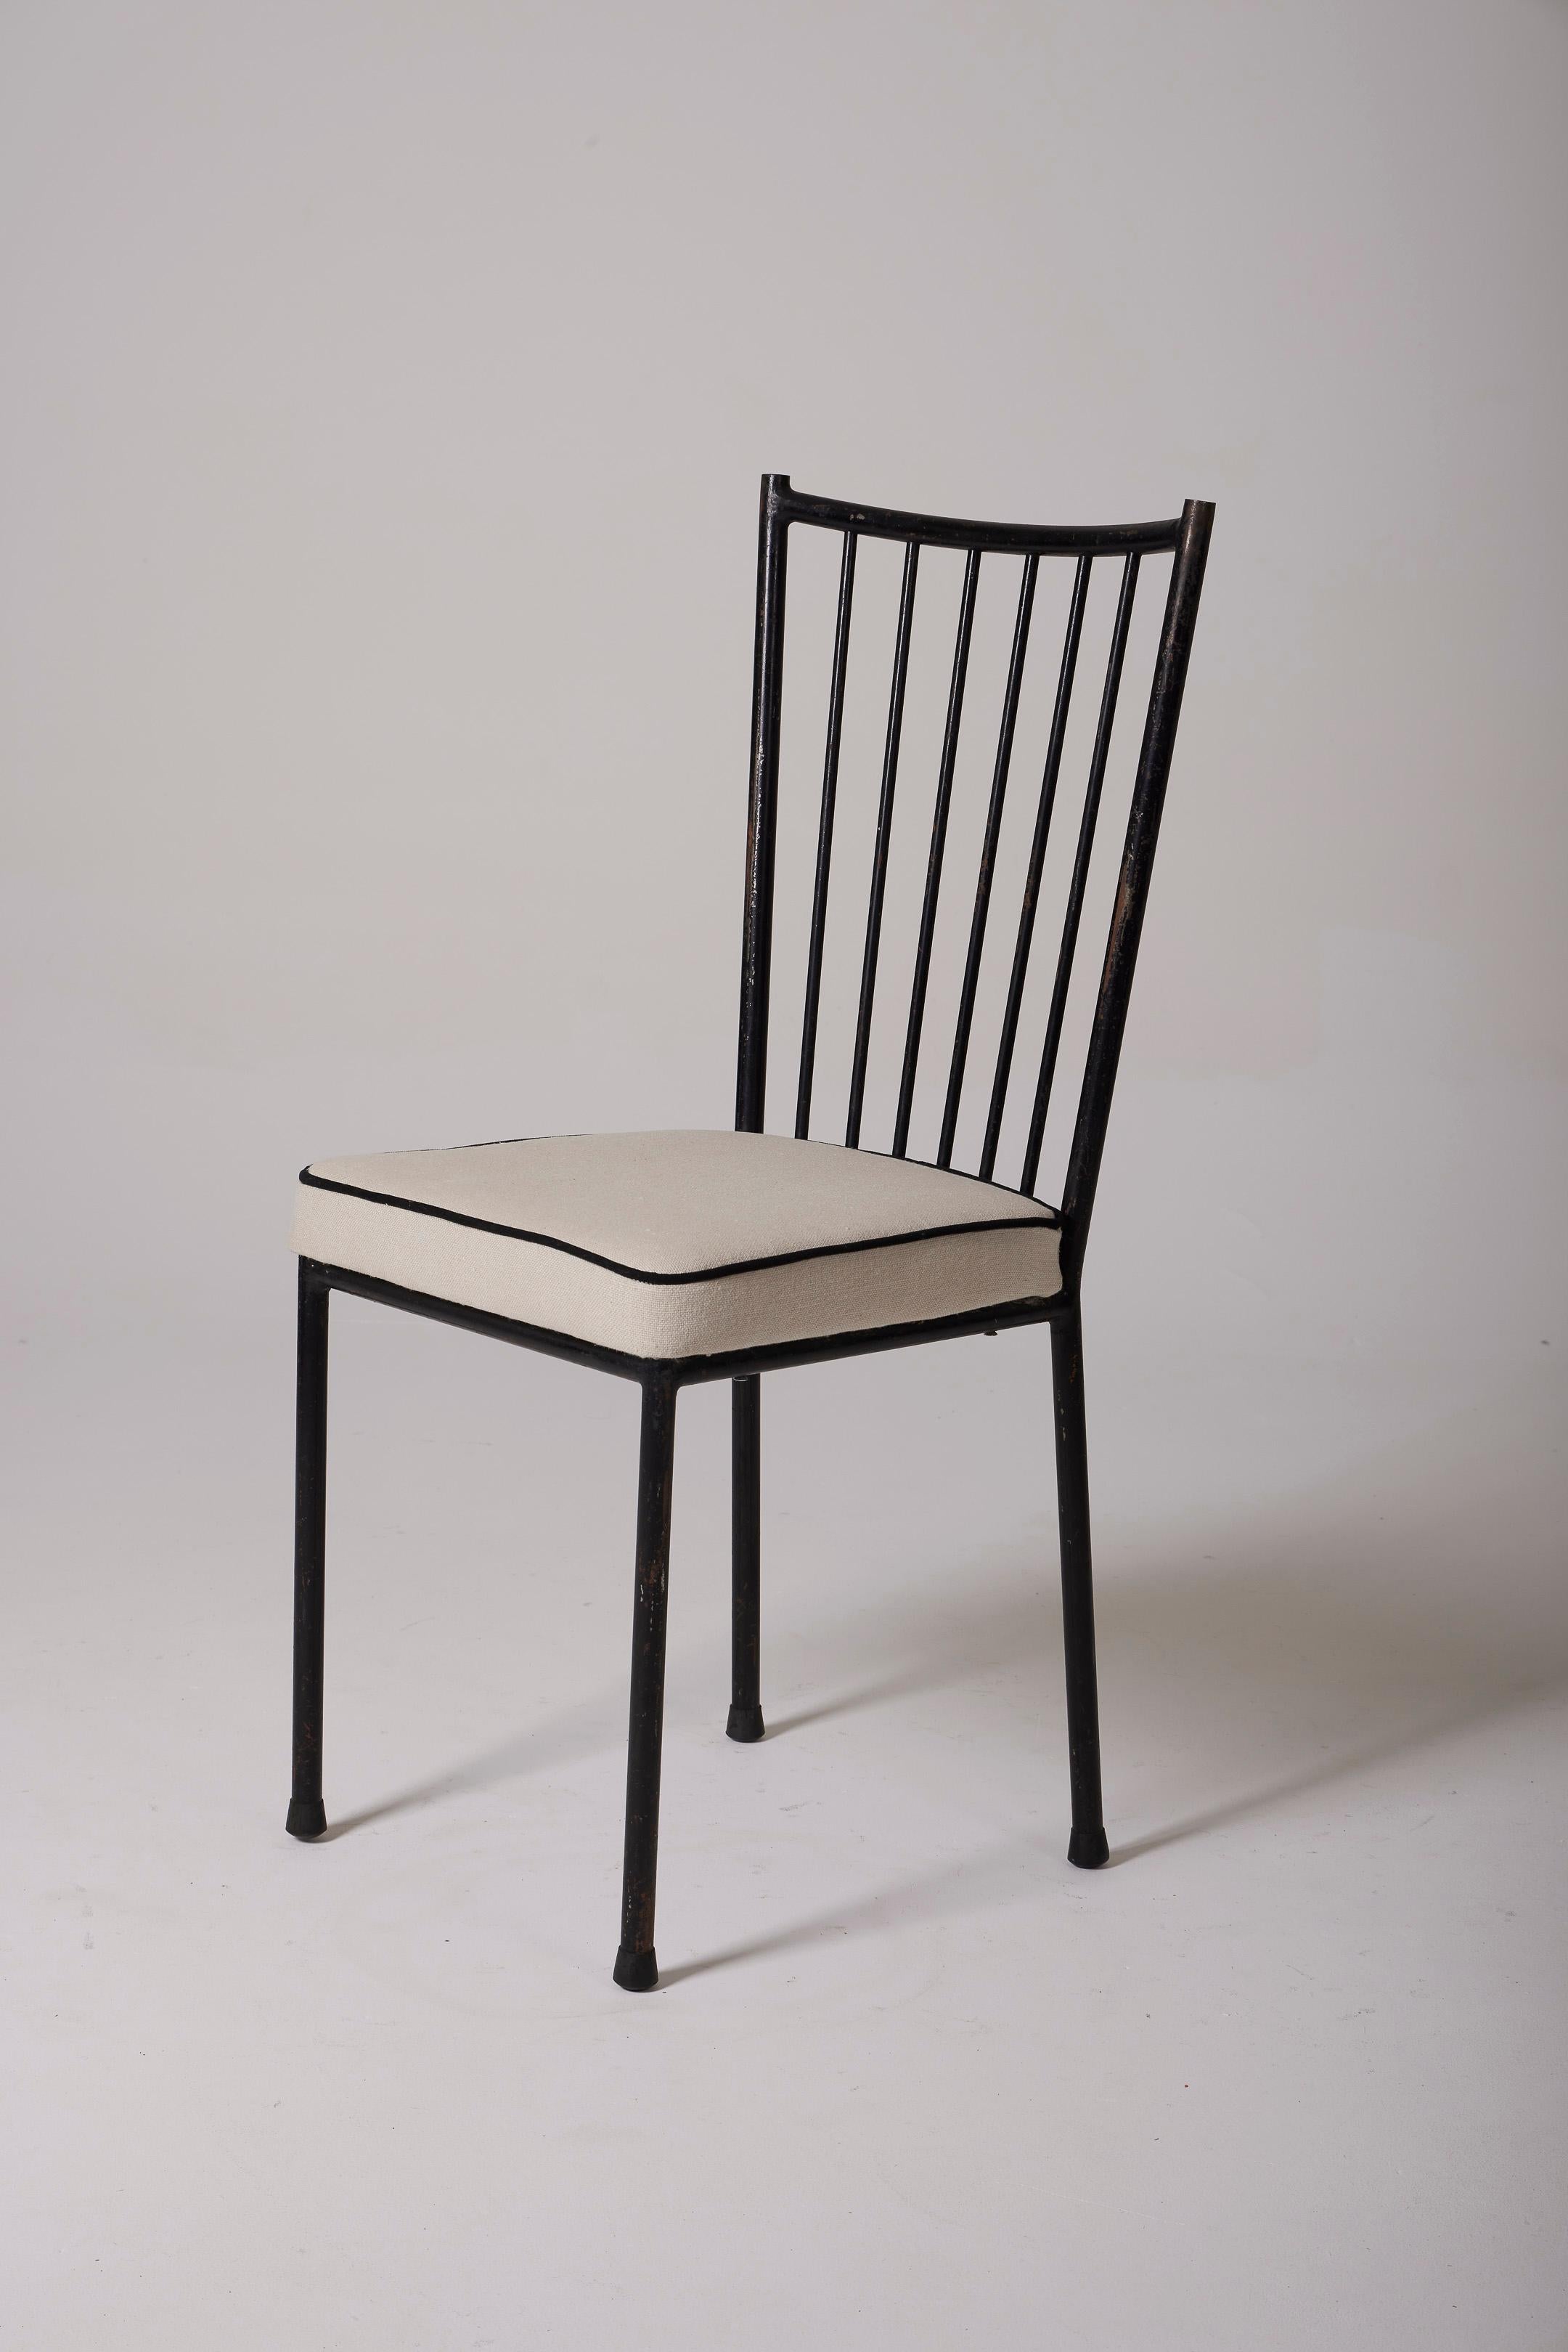 Wrought Iron Colette Gueden Chair For Sale